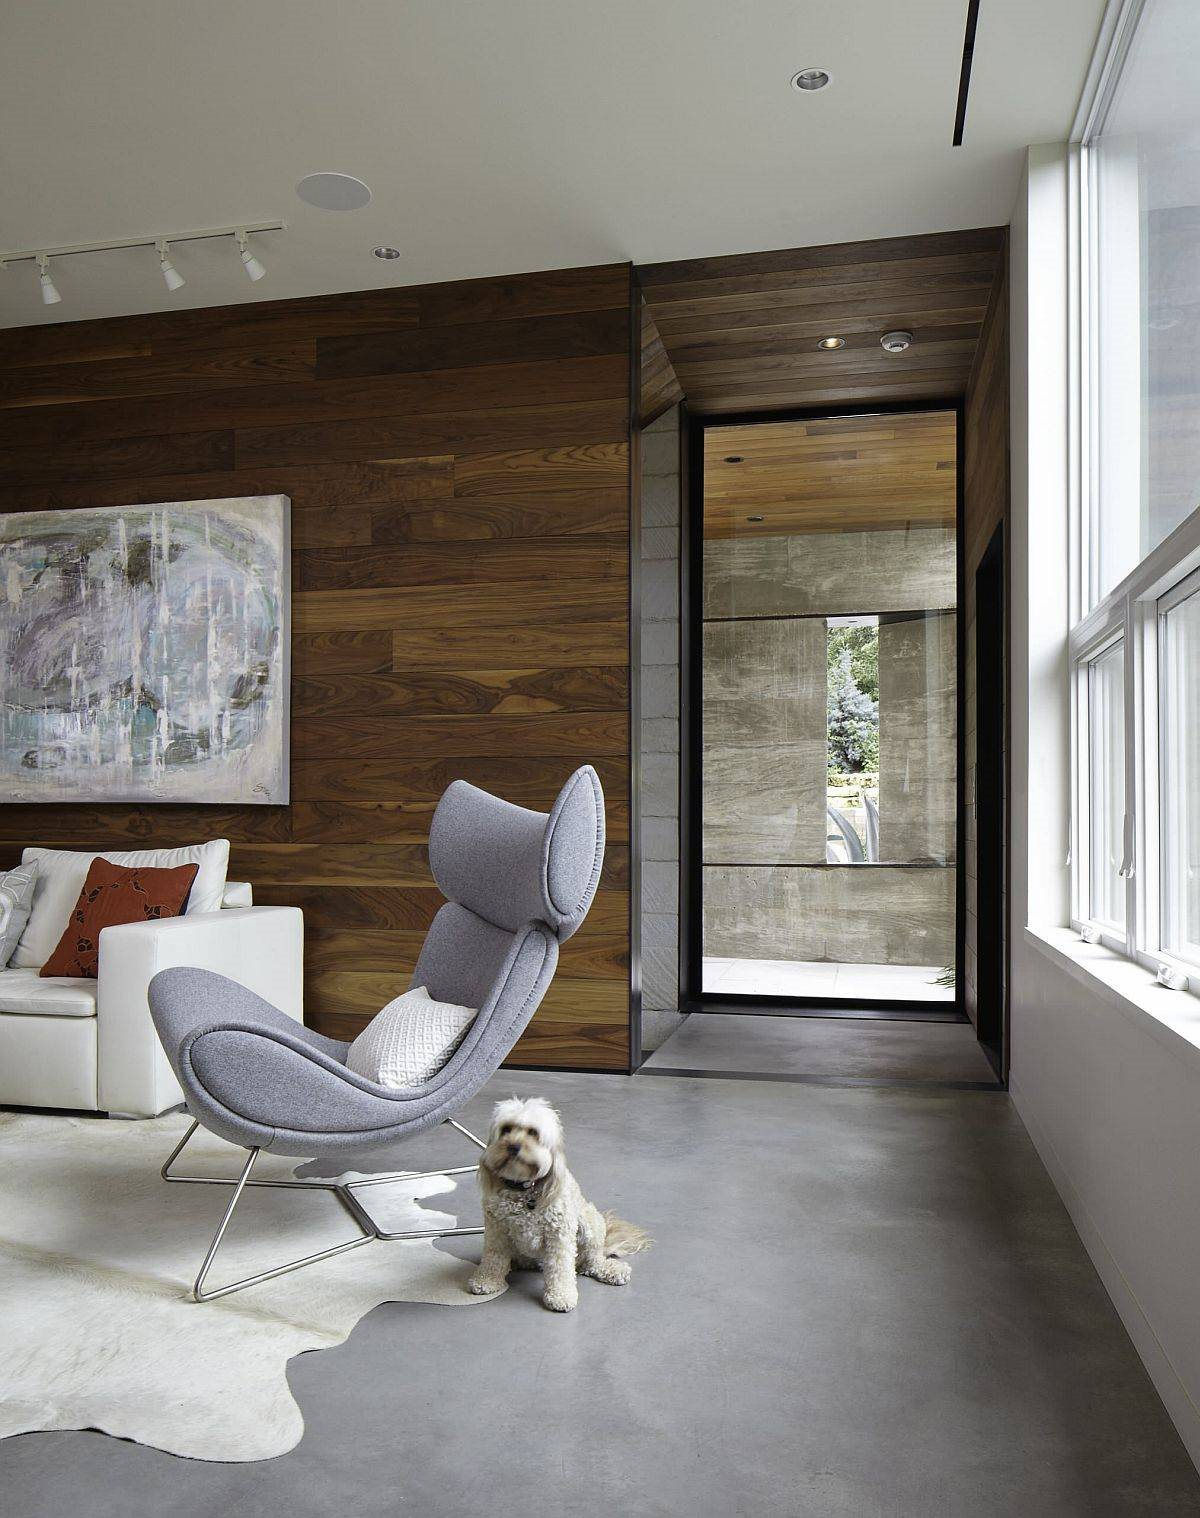 woodsy-walls-coupled-with-stoic-concrete-flooring-in-the-cozy-modern-living-room-87137.jpg